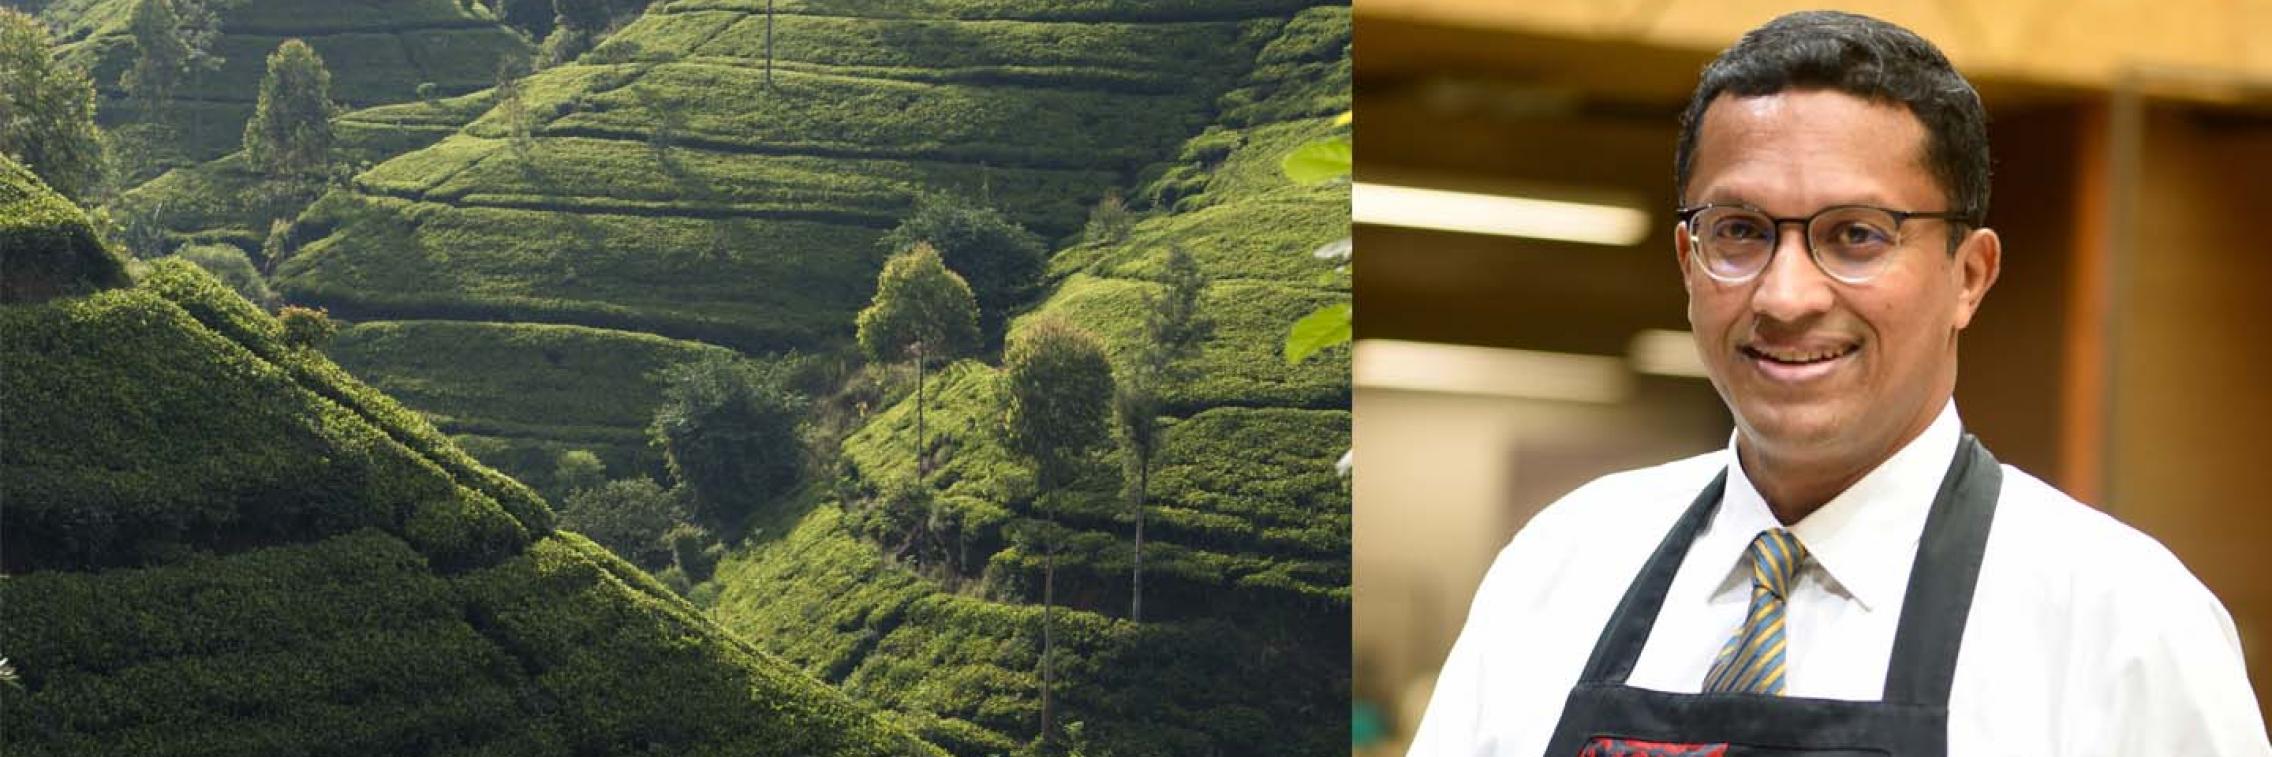 Tea fields in Sri Lanka and an image of Dilhan Fernando